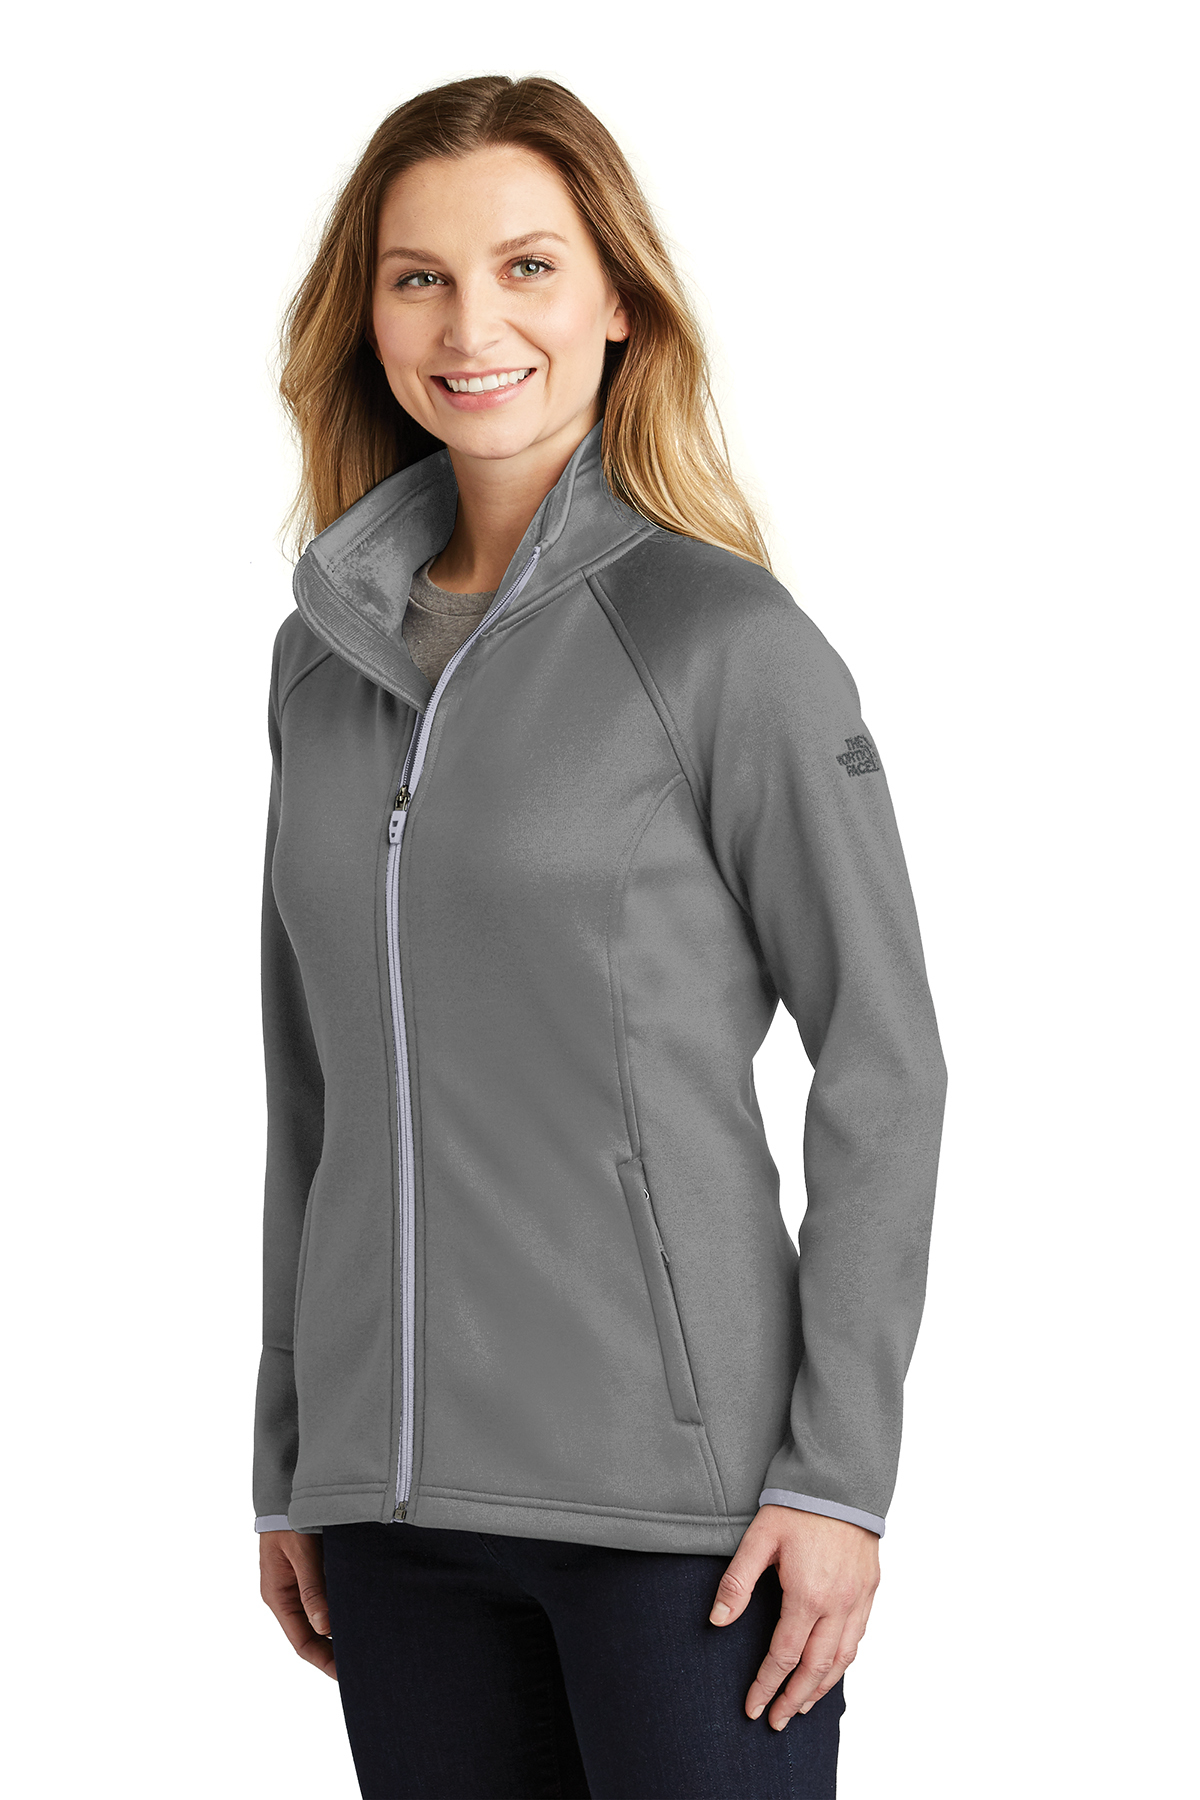 The North Face Ladies Canyon Flats Stretch Fleece Jacket | Product | SanMar